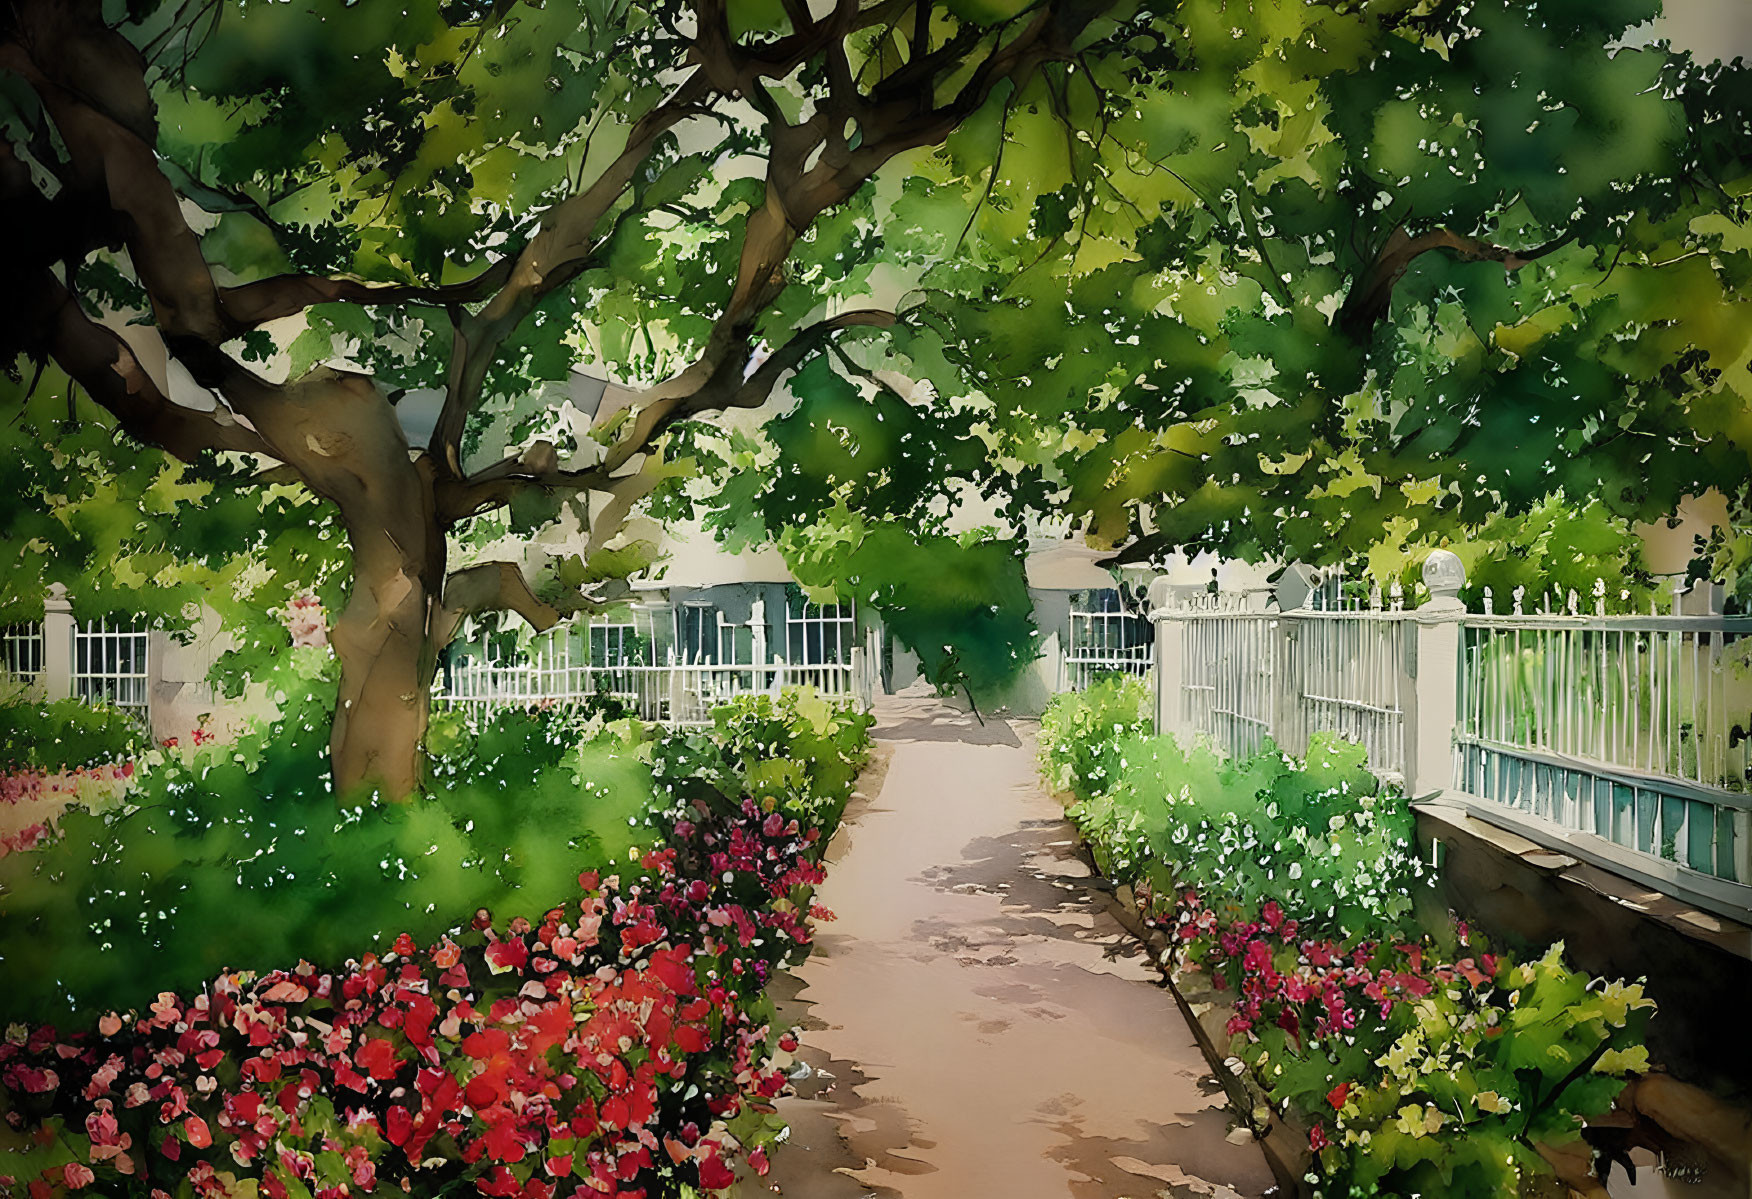 Tranquil watercolor painting of lush garden path with vibrant flowers and trees